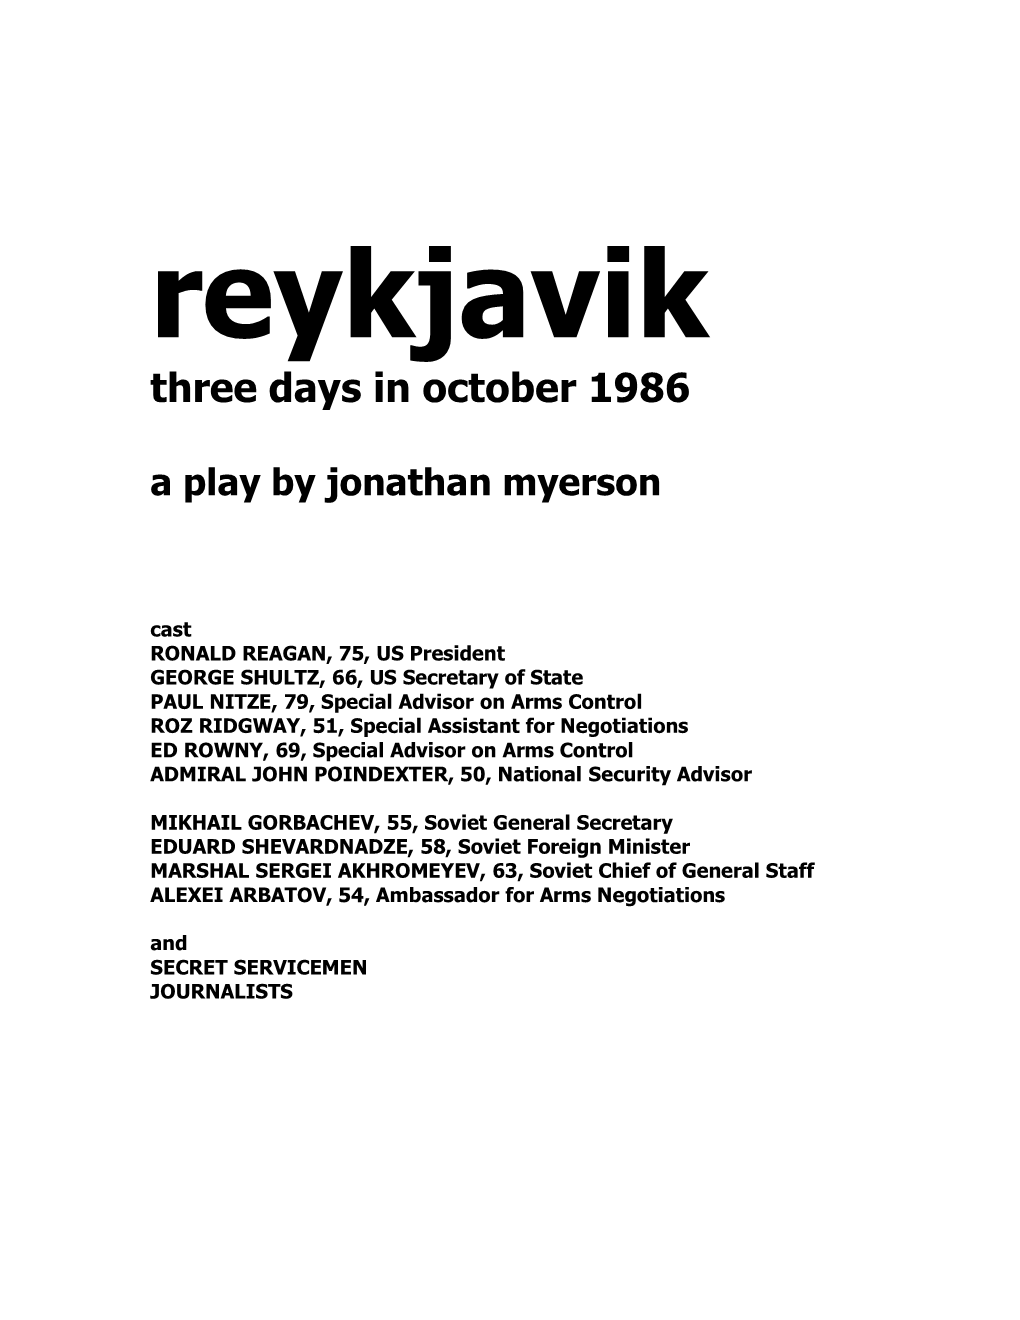 Reykjavik Three Days in October 1986 a Play by Jonathan Myerson